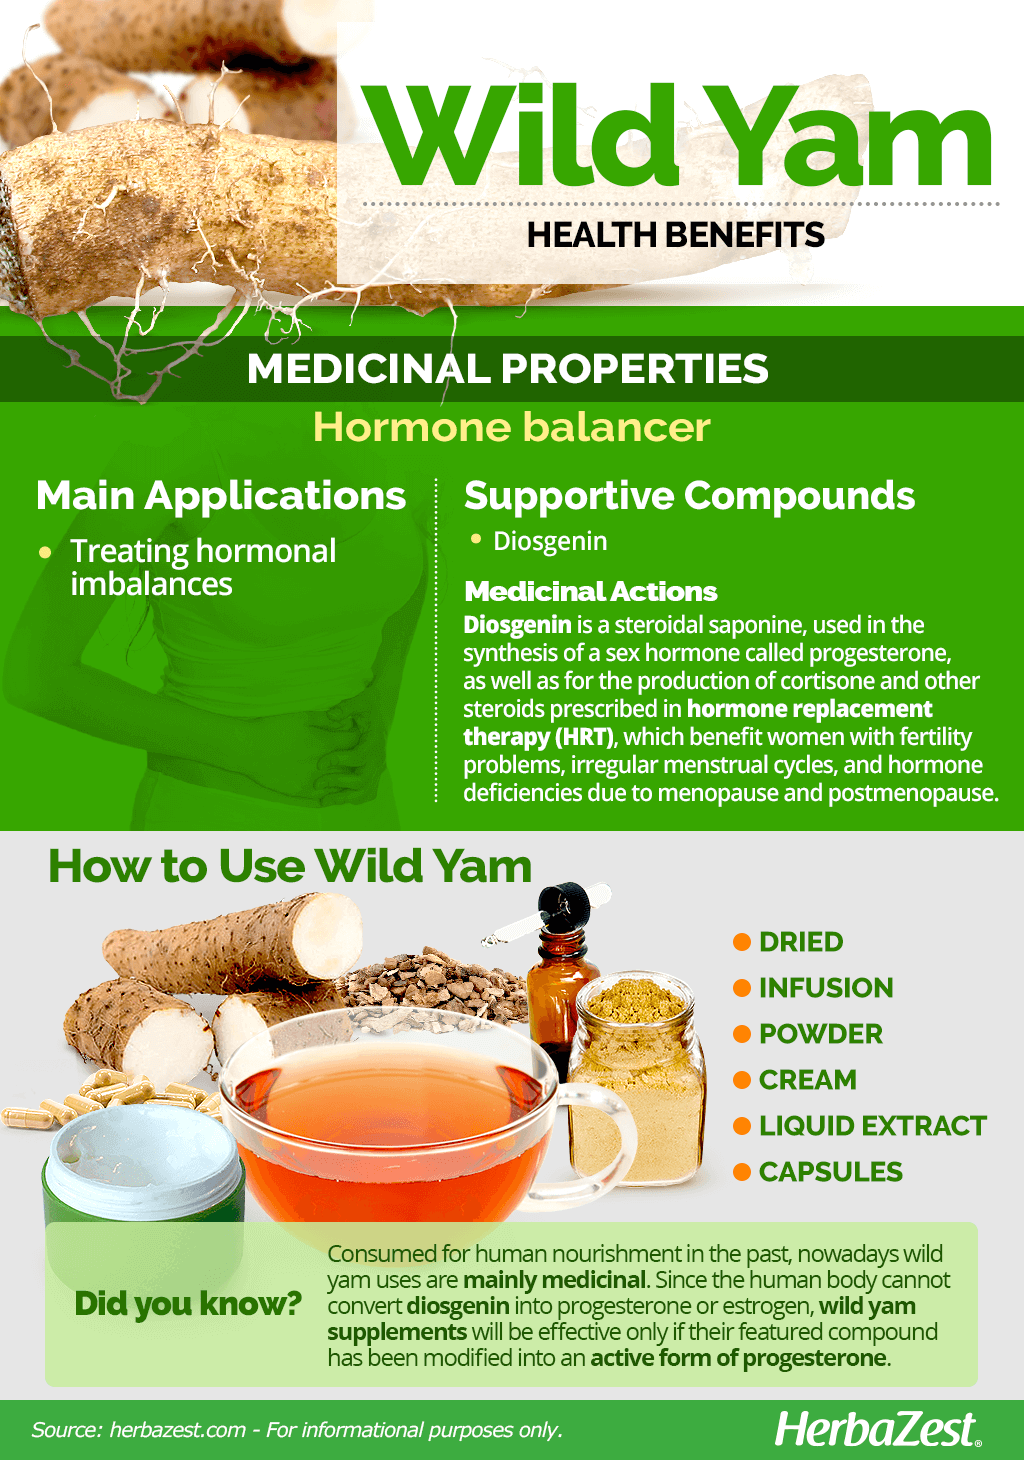 All About Wild Yam